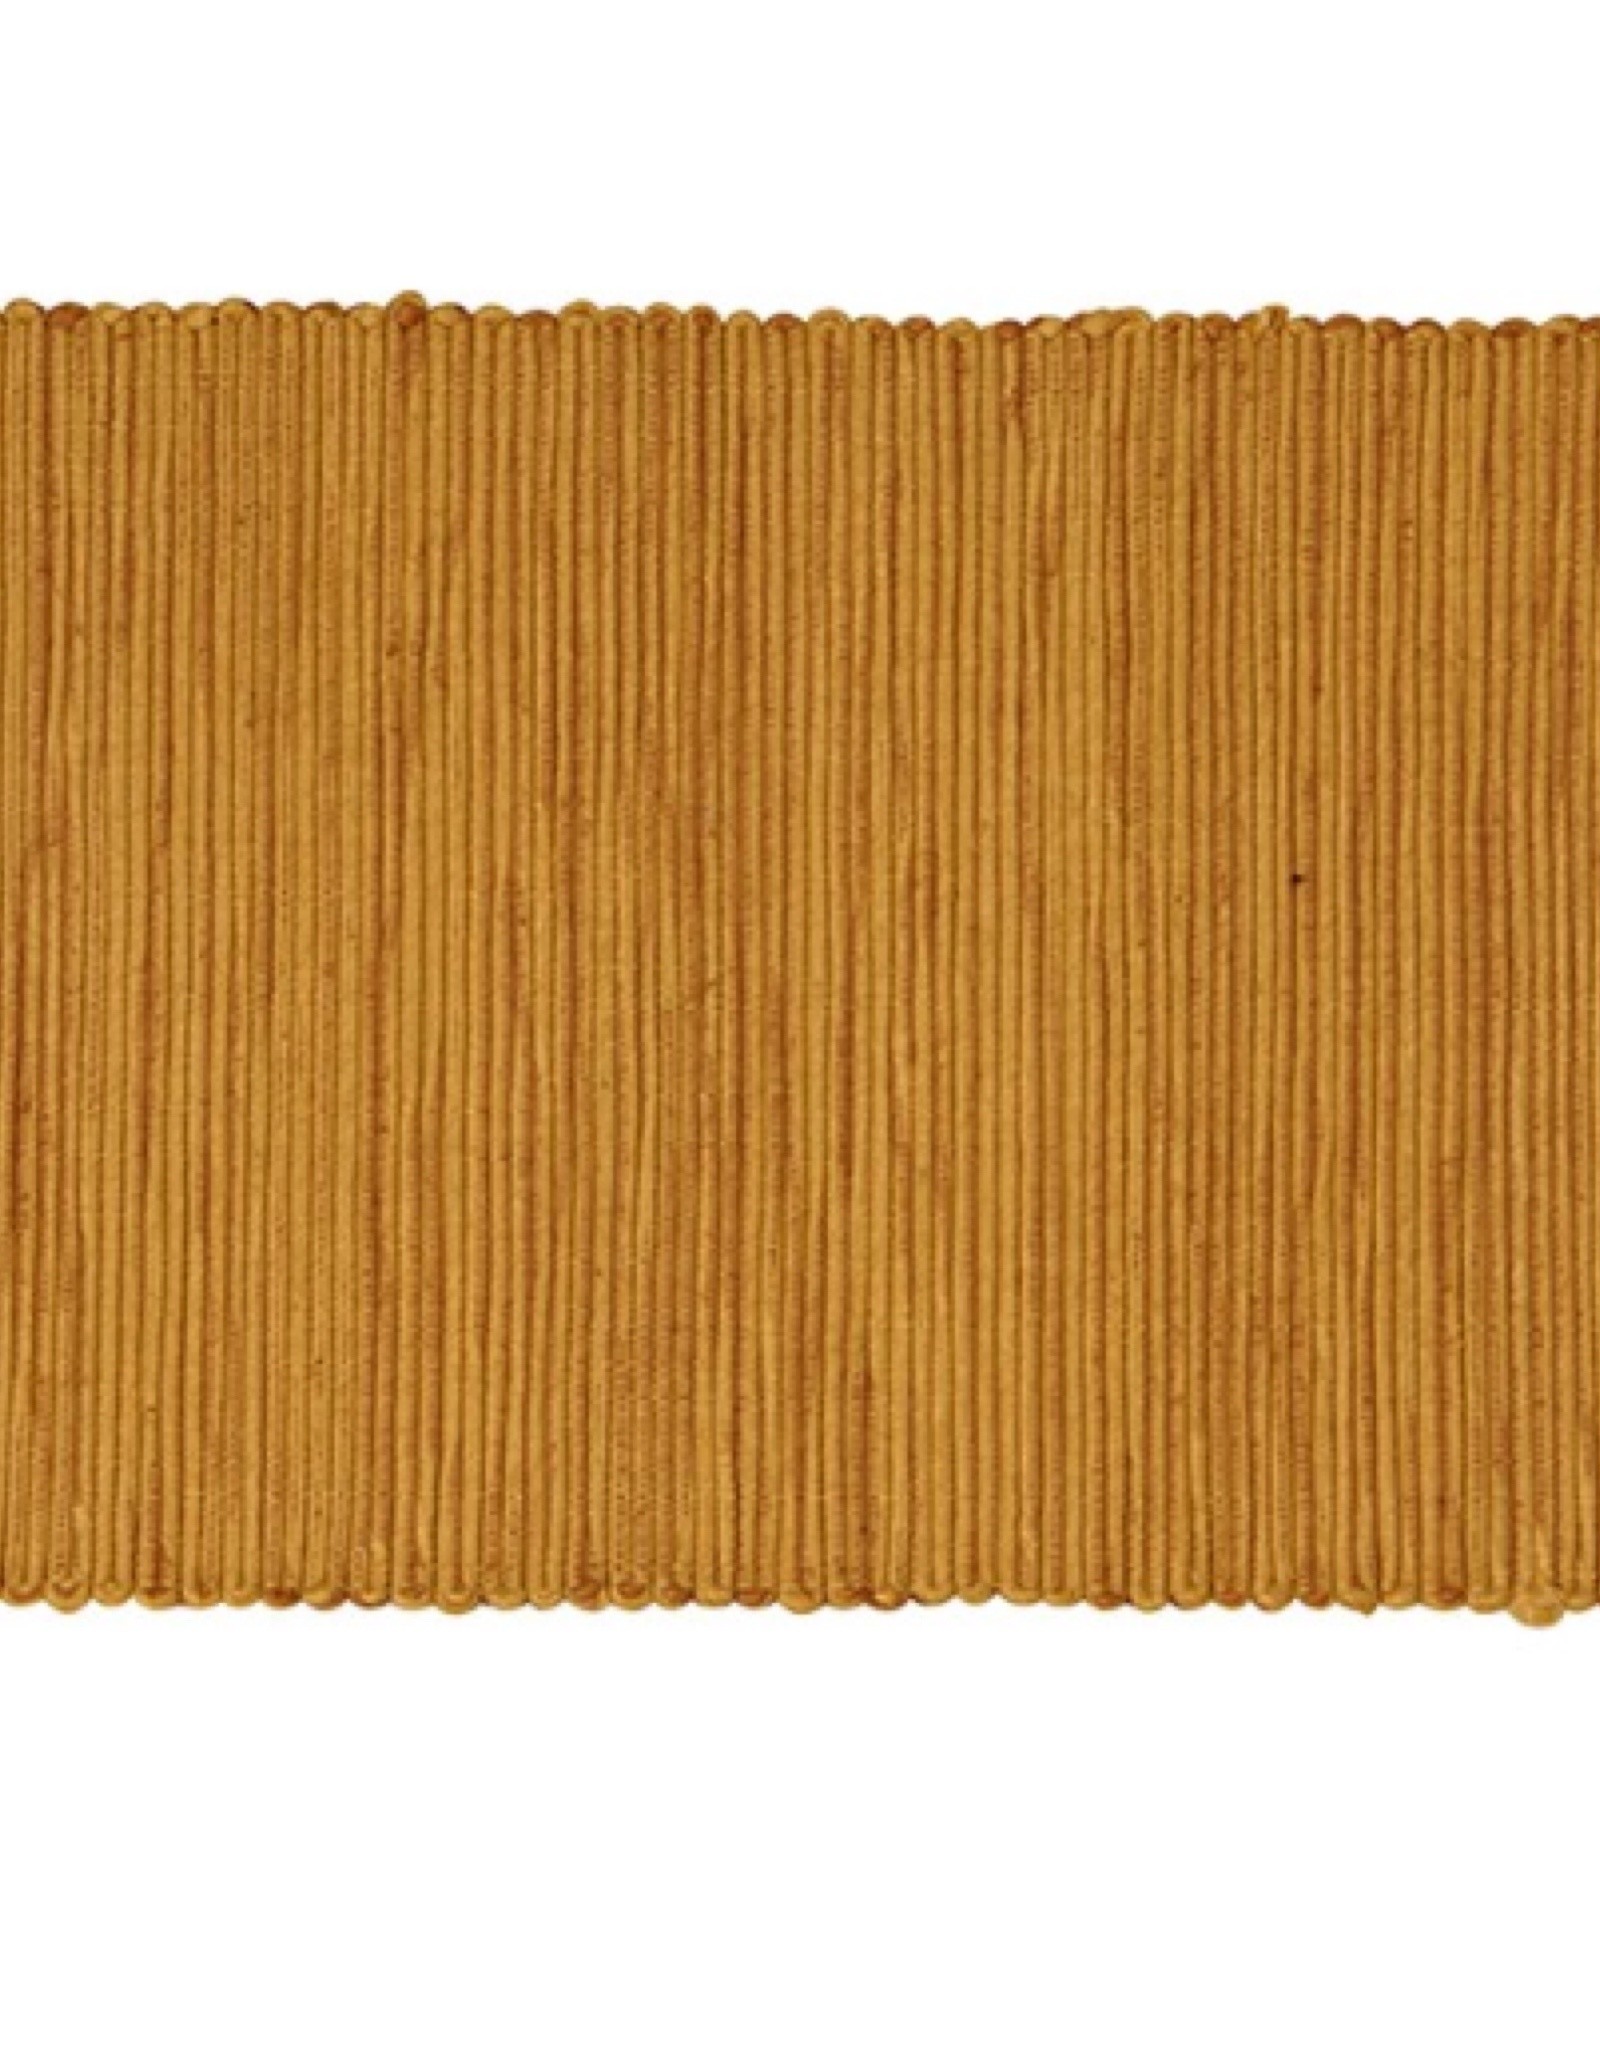 Placemat Harman Two Toned Ribbed Harvest Gold 0888615